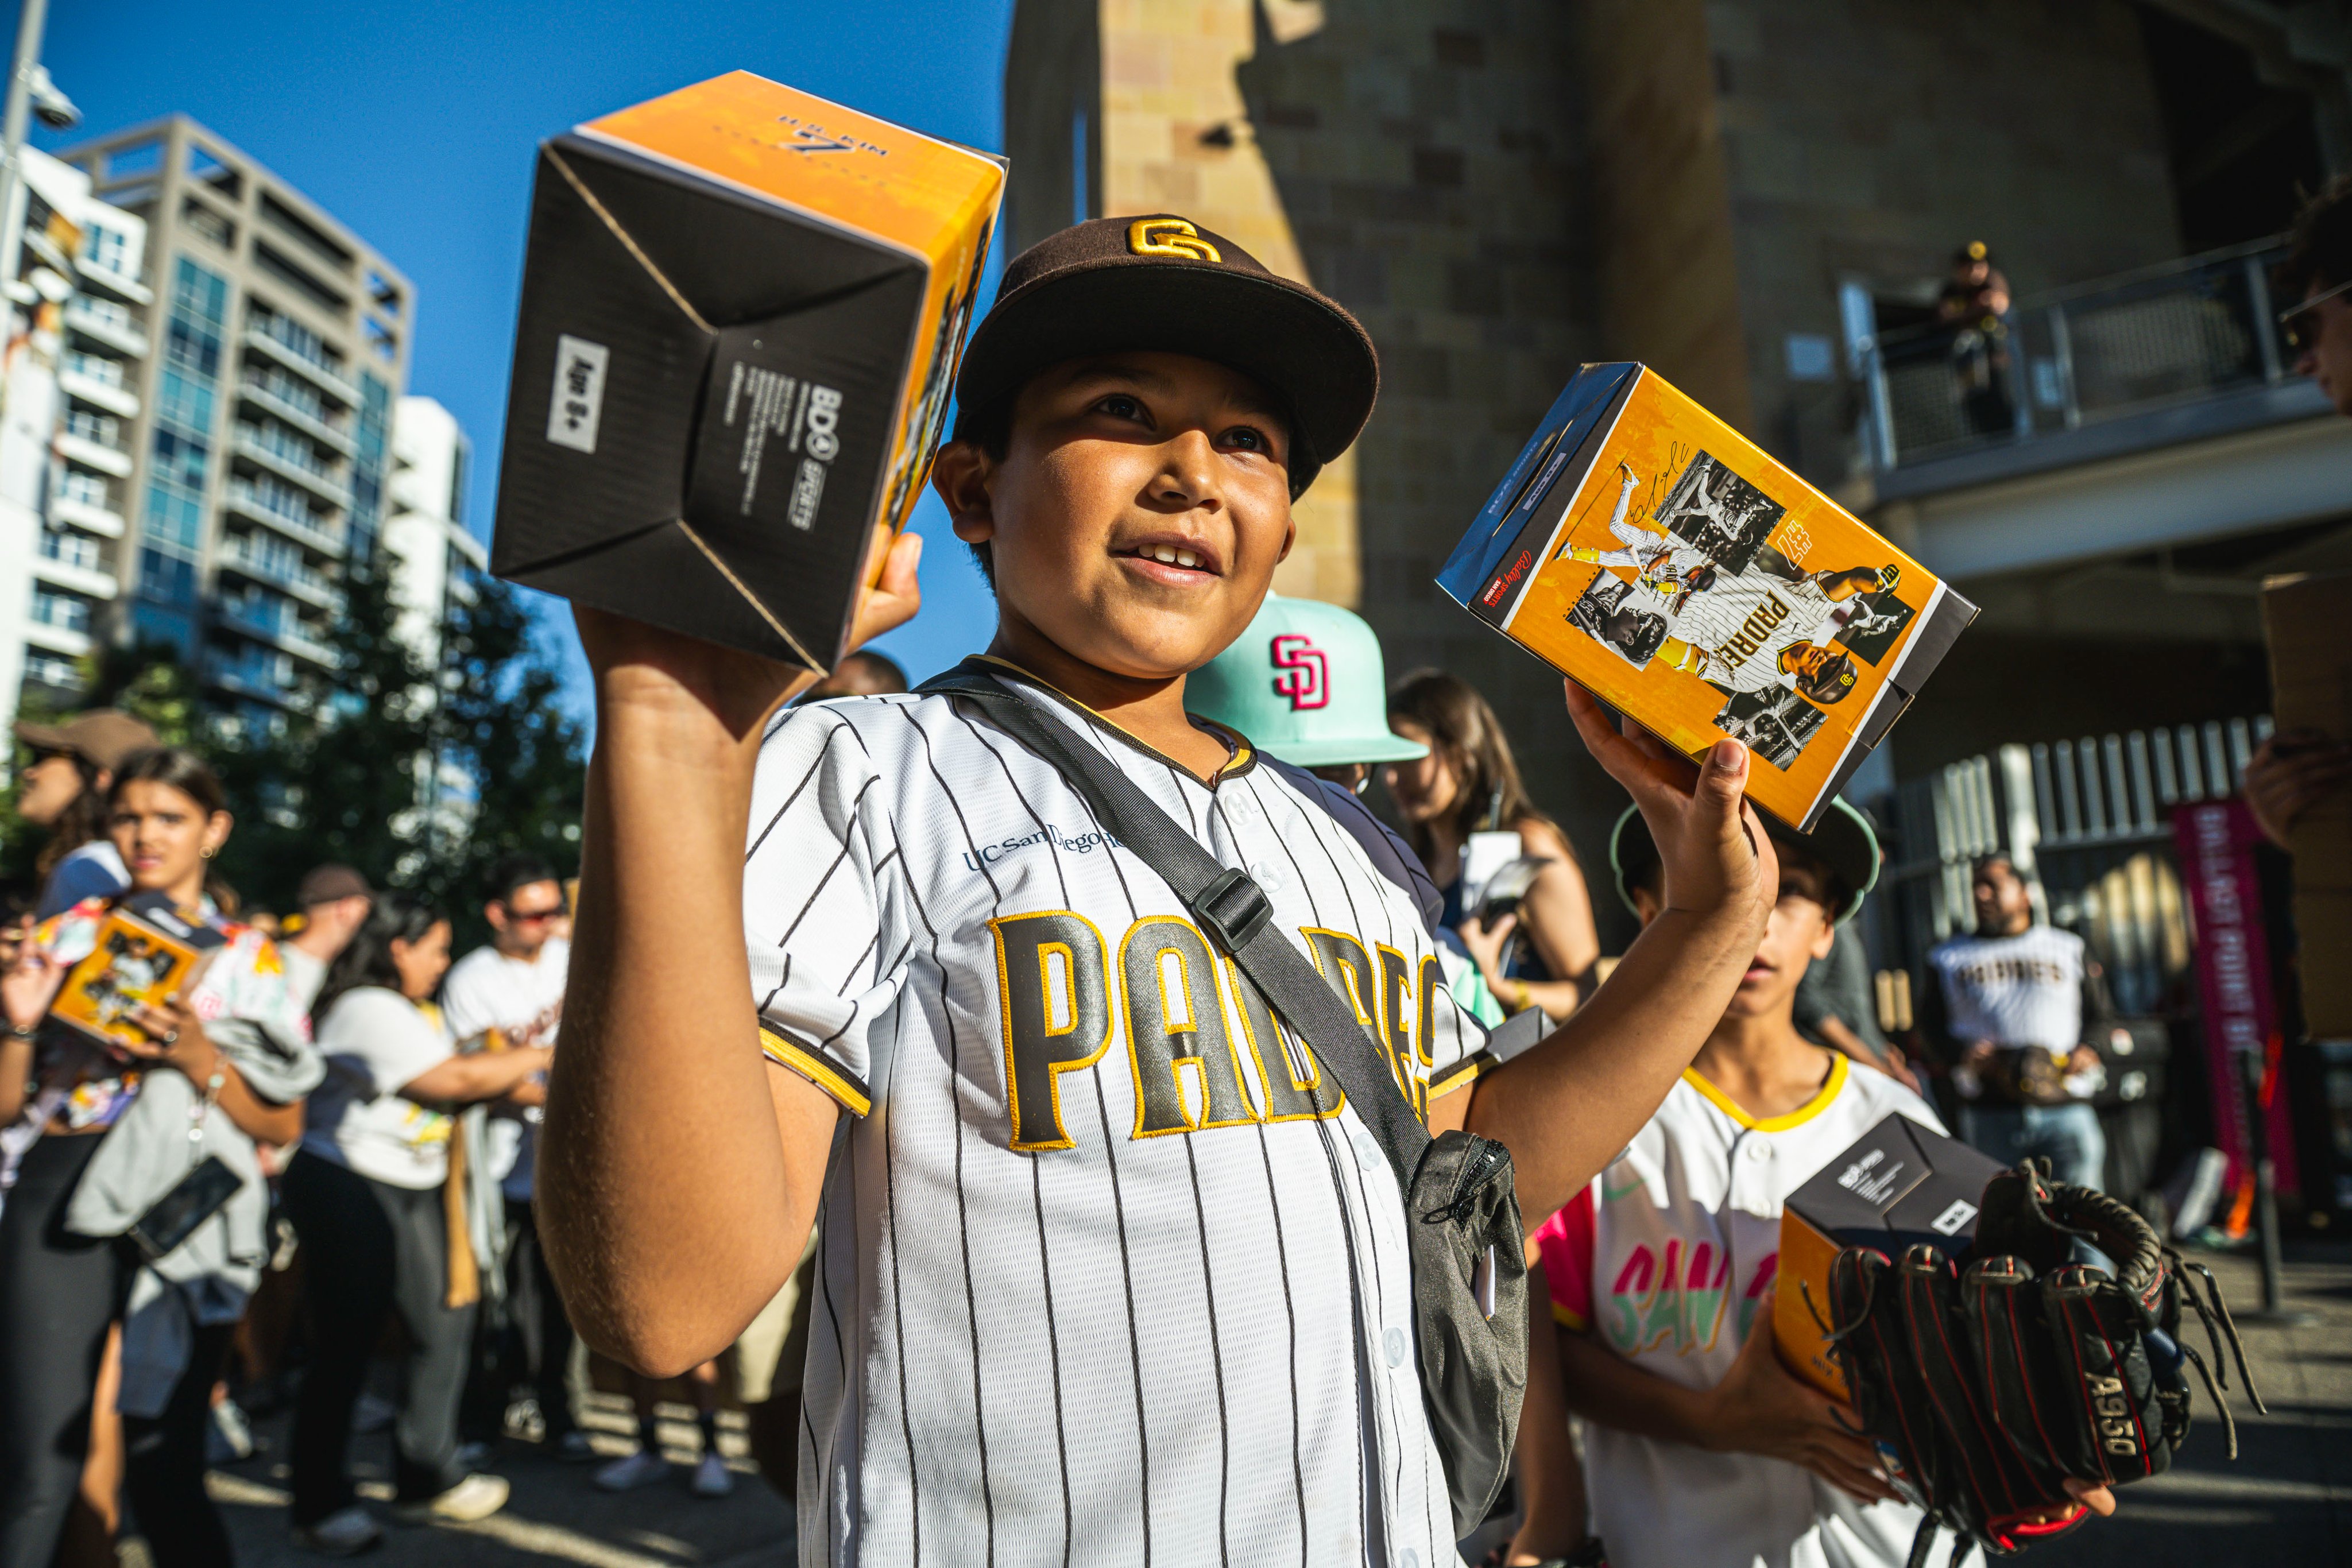 Petco Park on X: Hyped for Ha-Seong's bobblehead!